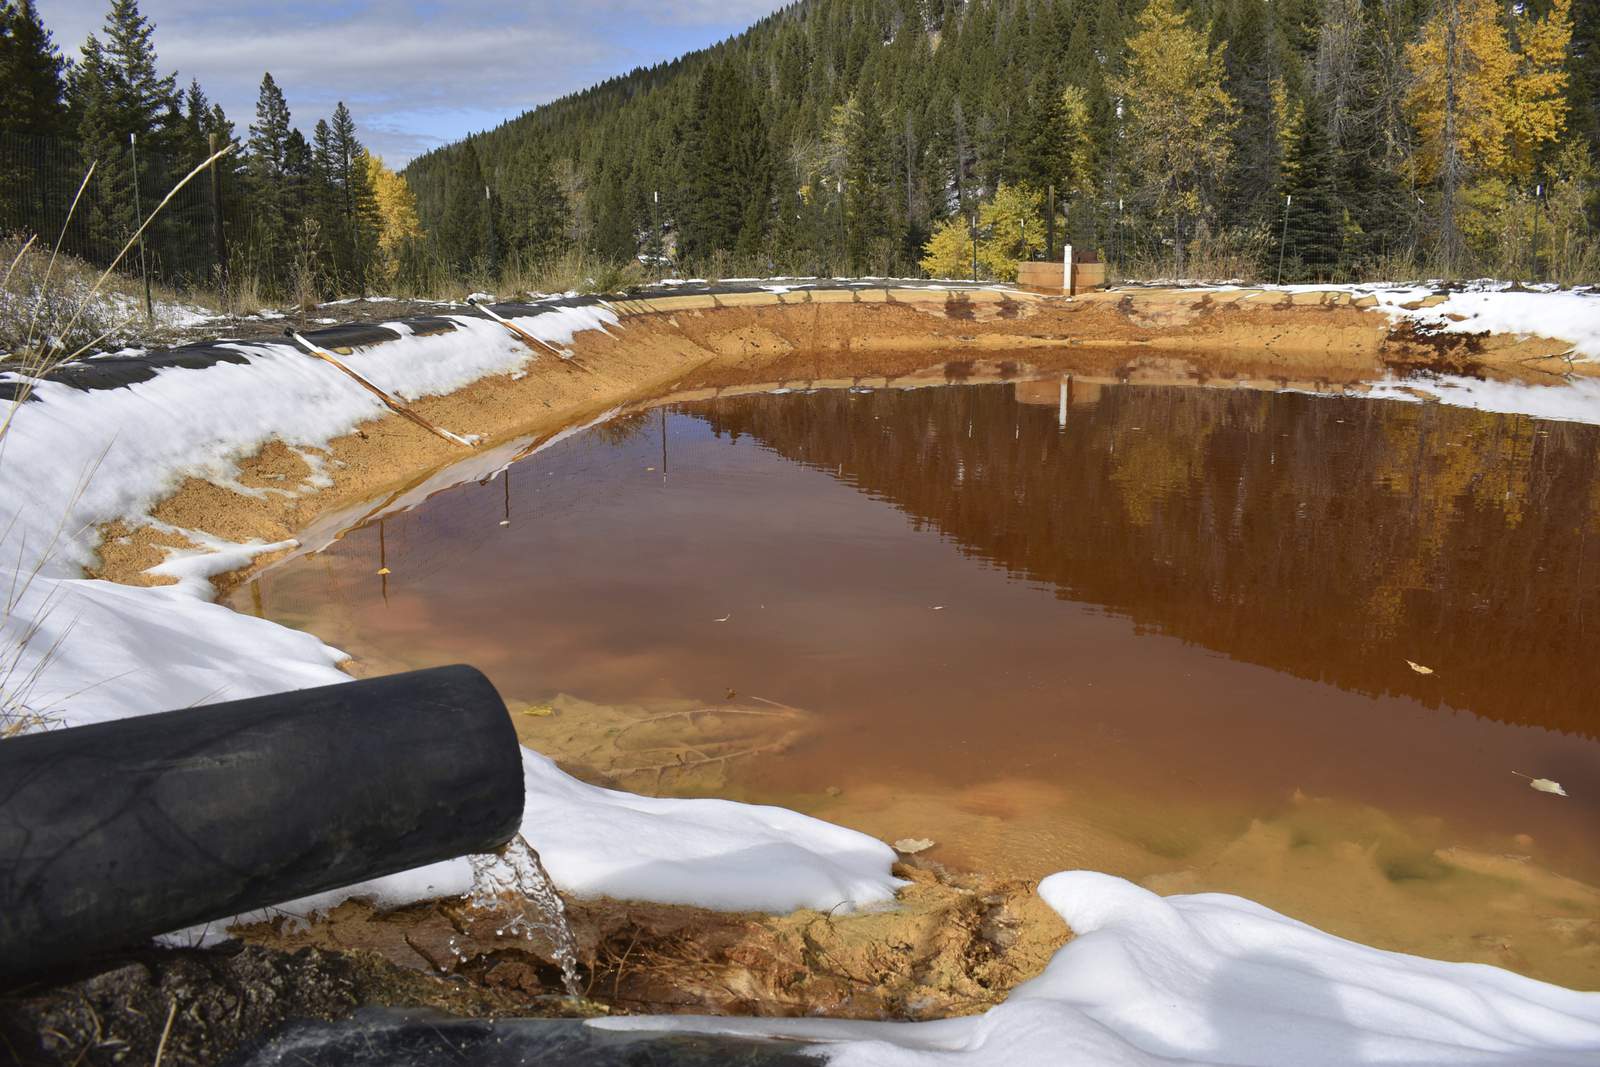 Biden plan would spend $16B to clean up old mines, oil wells